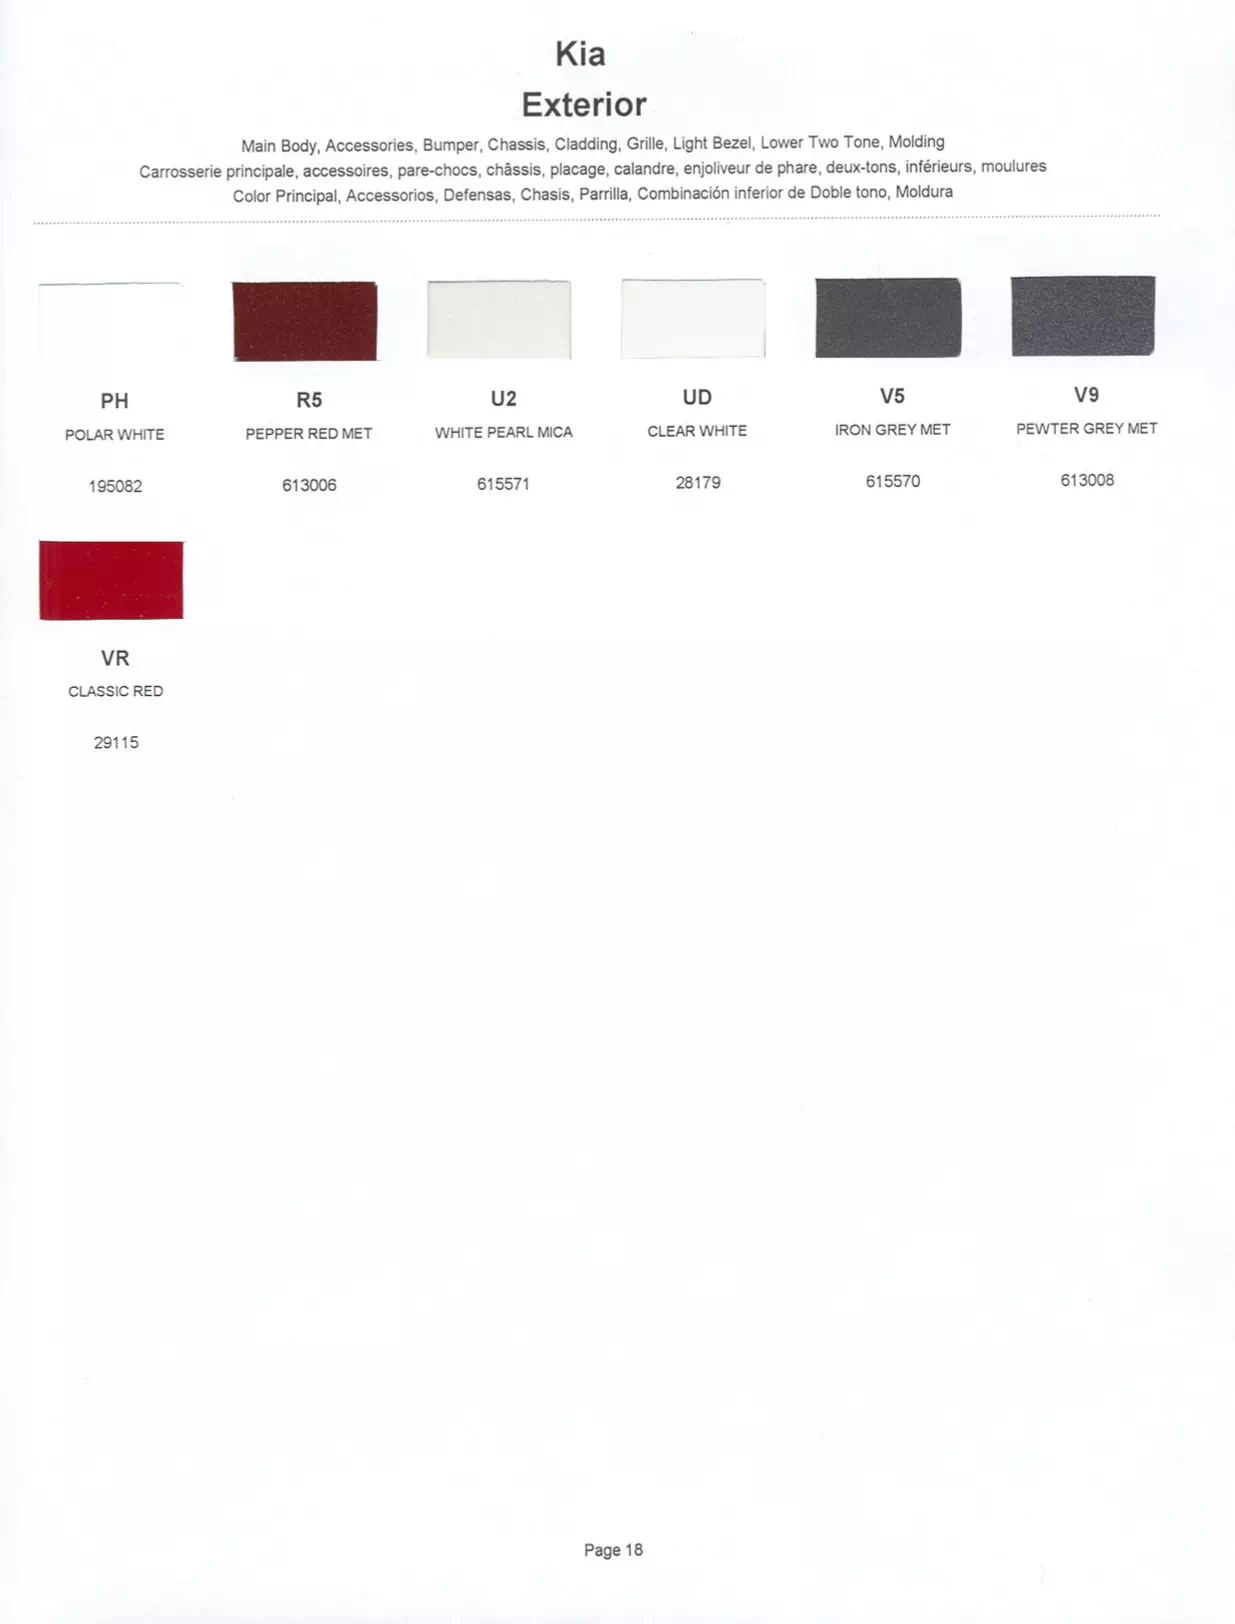 Exterior Paint Colors for Kia Vehicles in 2001